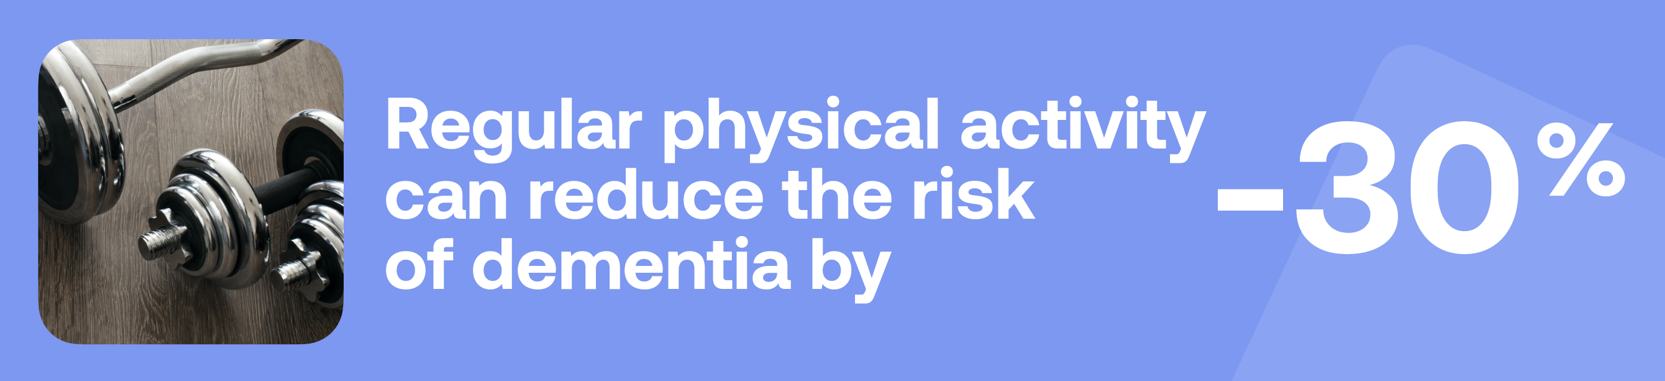 Regular physical activity can reduce the risk of dementia by -30%